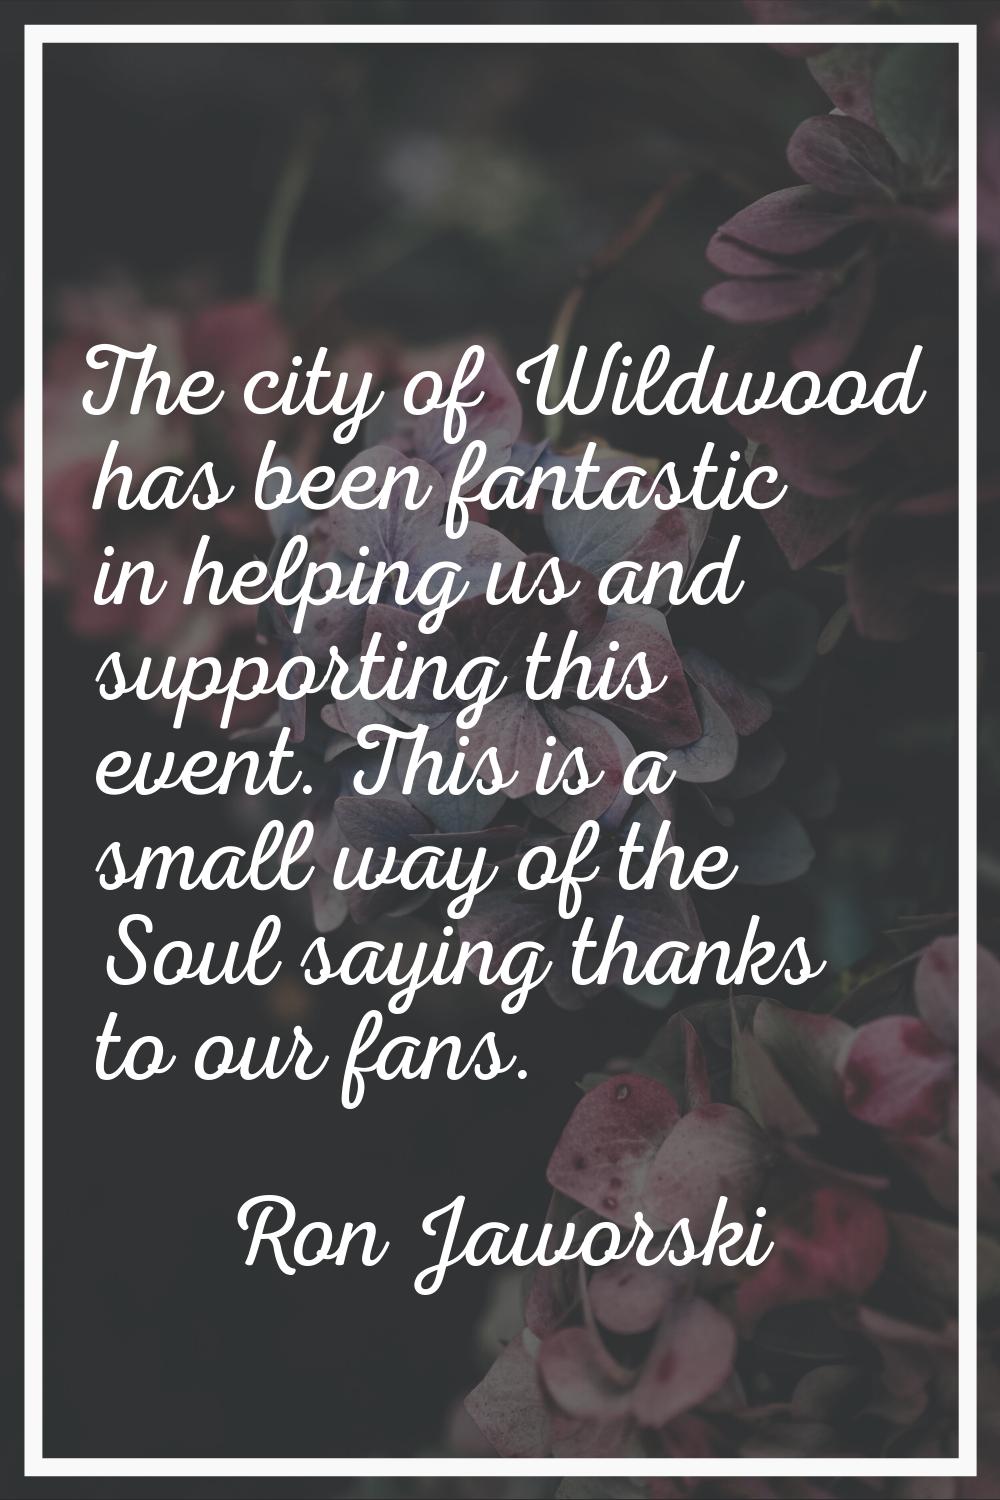 The city of Wildwood has been fantastic in helping us and supporting this event. This is a small wa